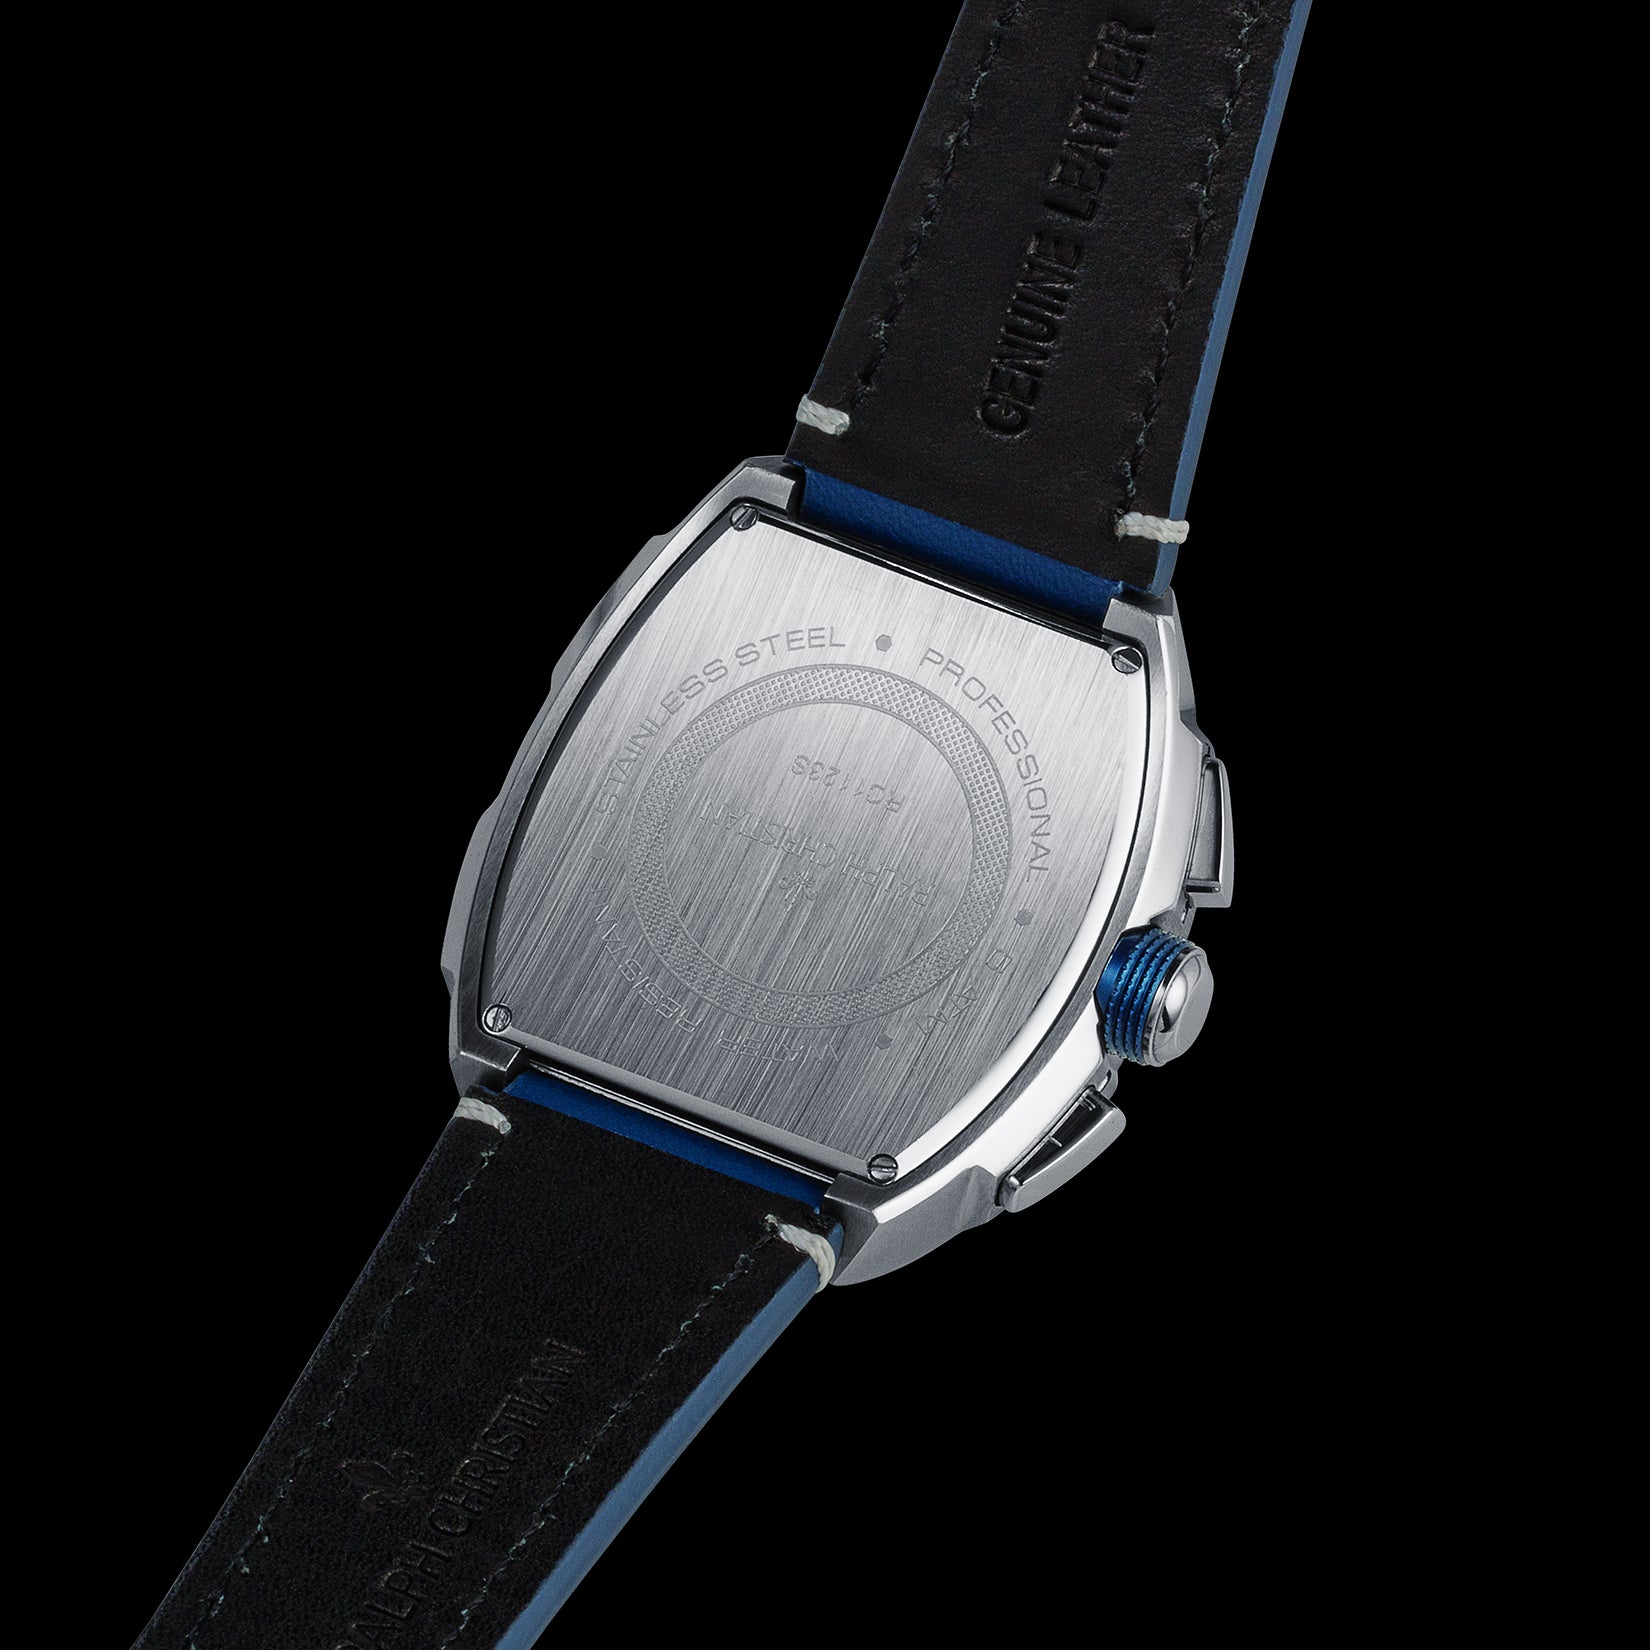 The Intrepid Chronograph - Blue | Ralph Christian Watches